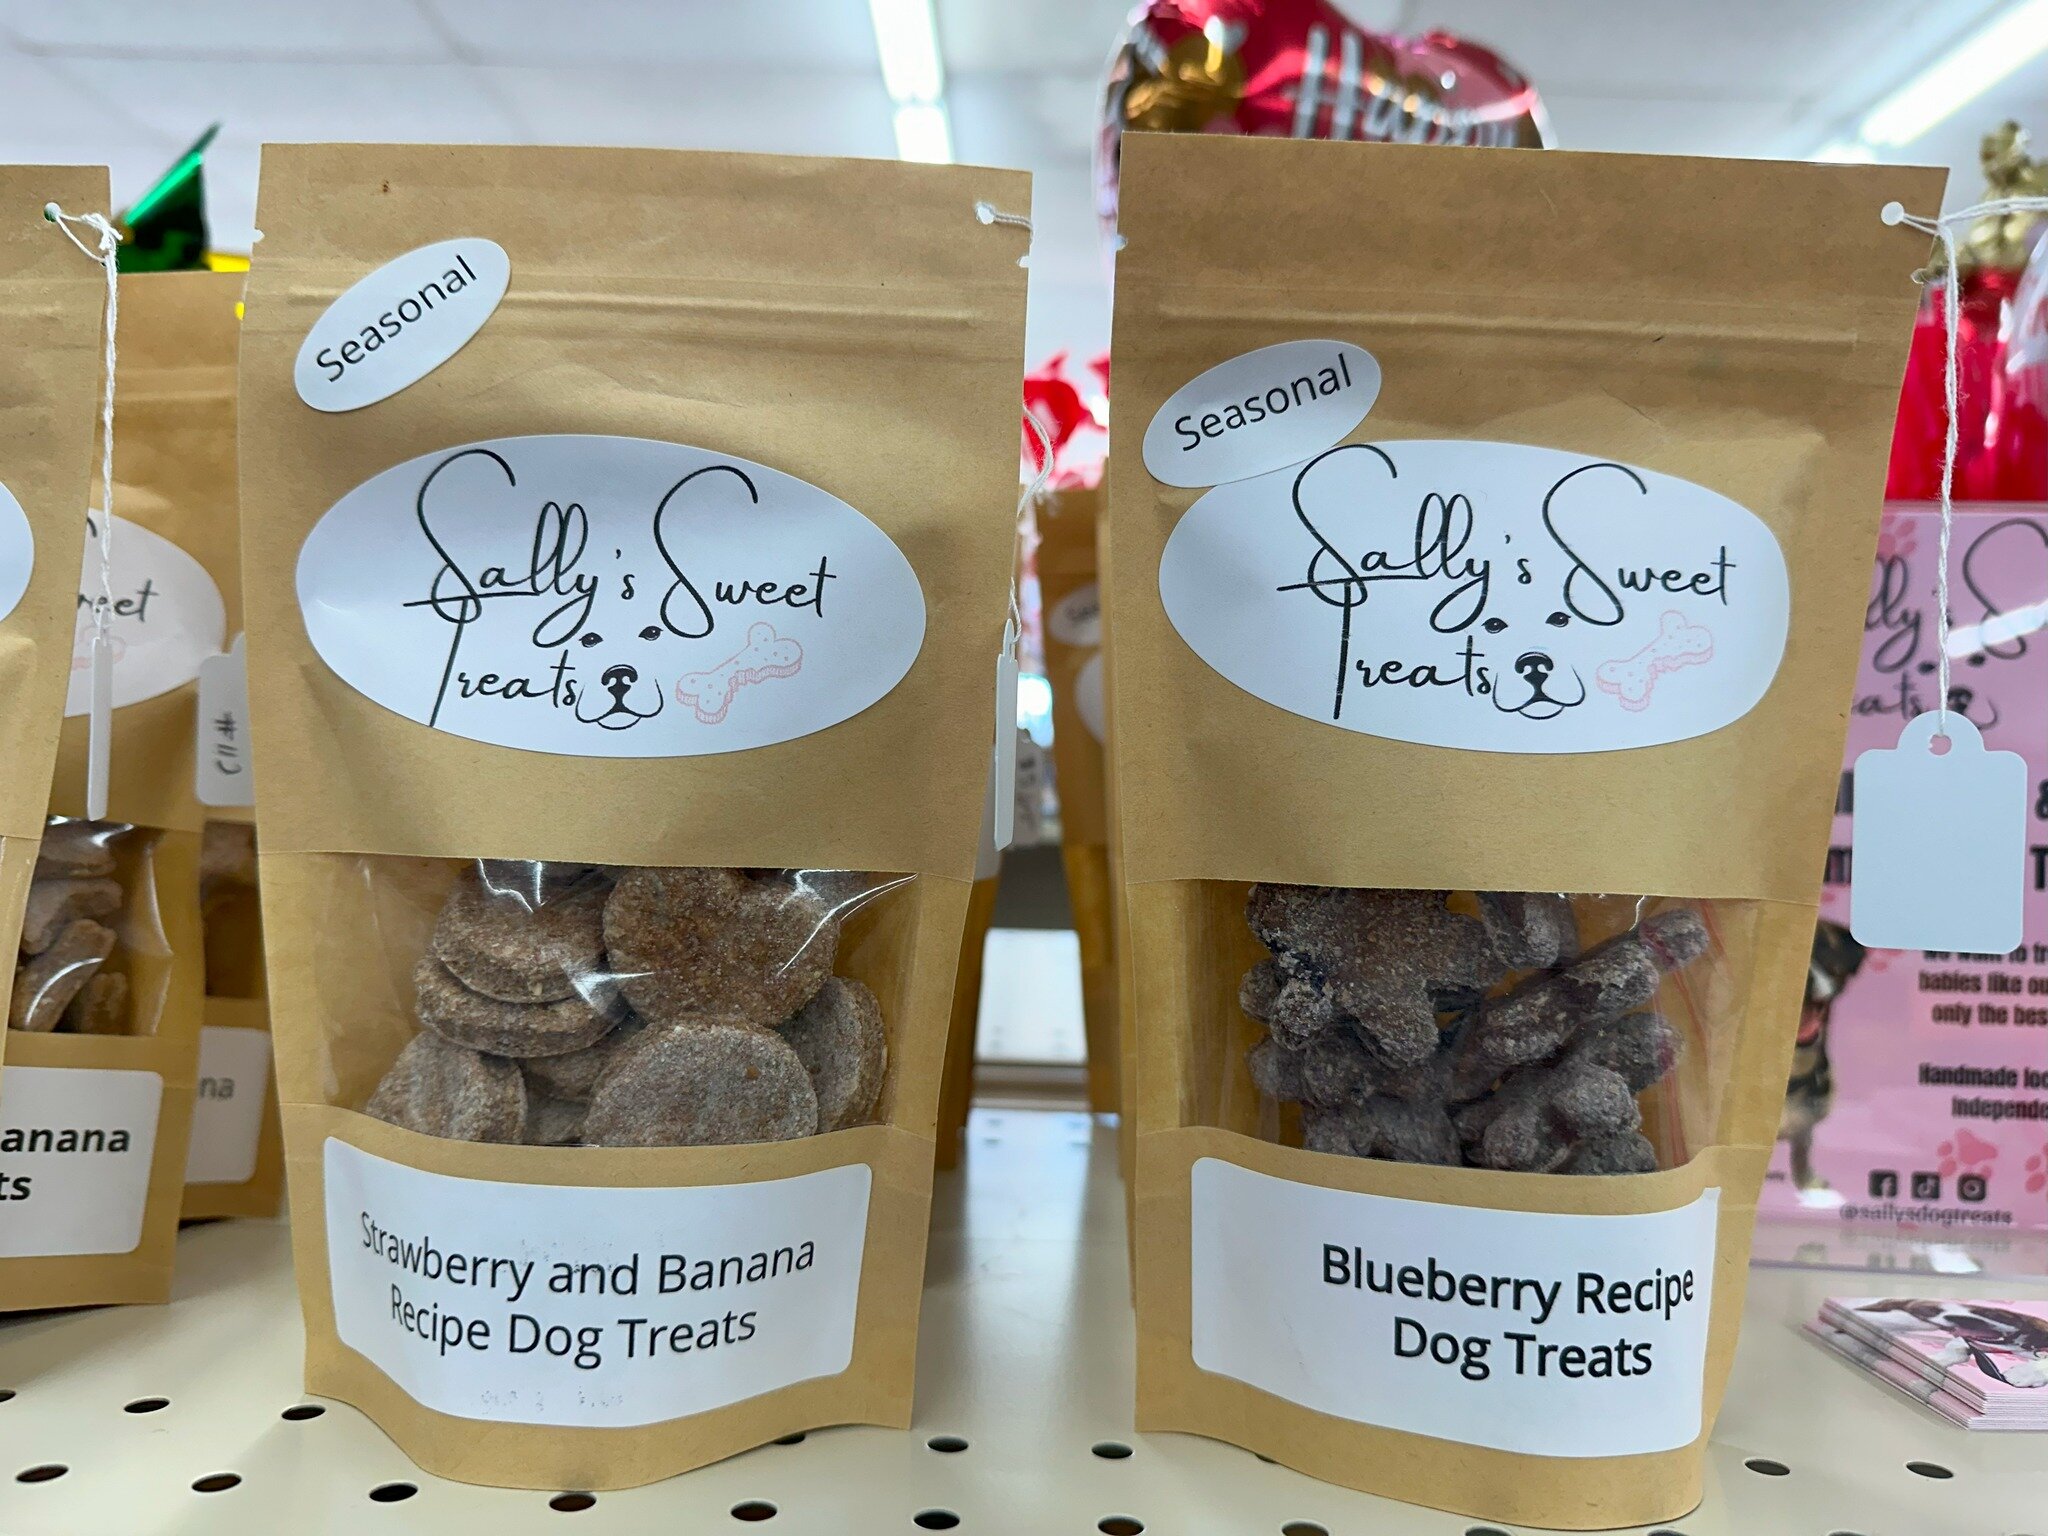 This week we dropped another new Seasonal treat!! 🐾❤

Have you checked out our Strawberry and Banana Treats?? Now added Blueberry Treats! 

Our Blueberry Treats are egg-free!!! We've had many people ask for egg-free here is our first egg-free season